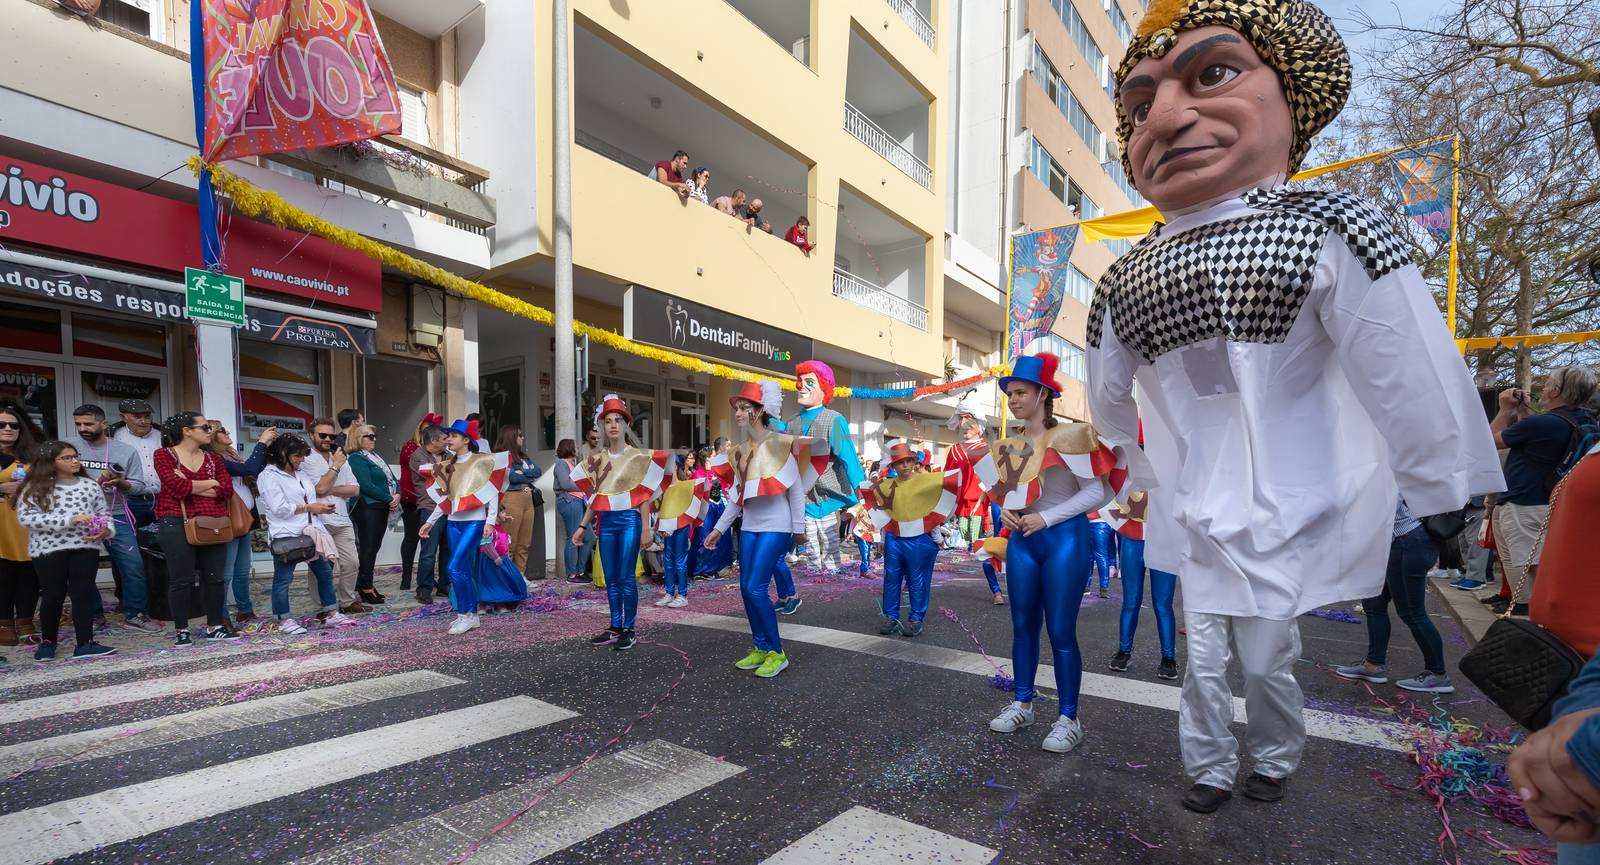 dancers parading in the street in carnival of Loule city, Portug by AtlanticEUROSTOXX